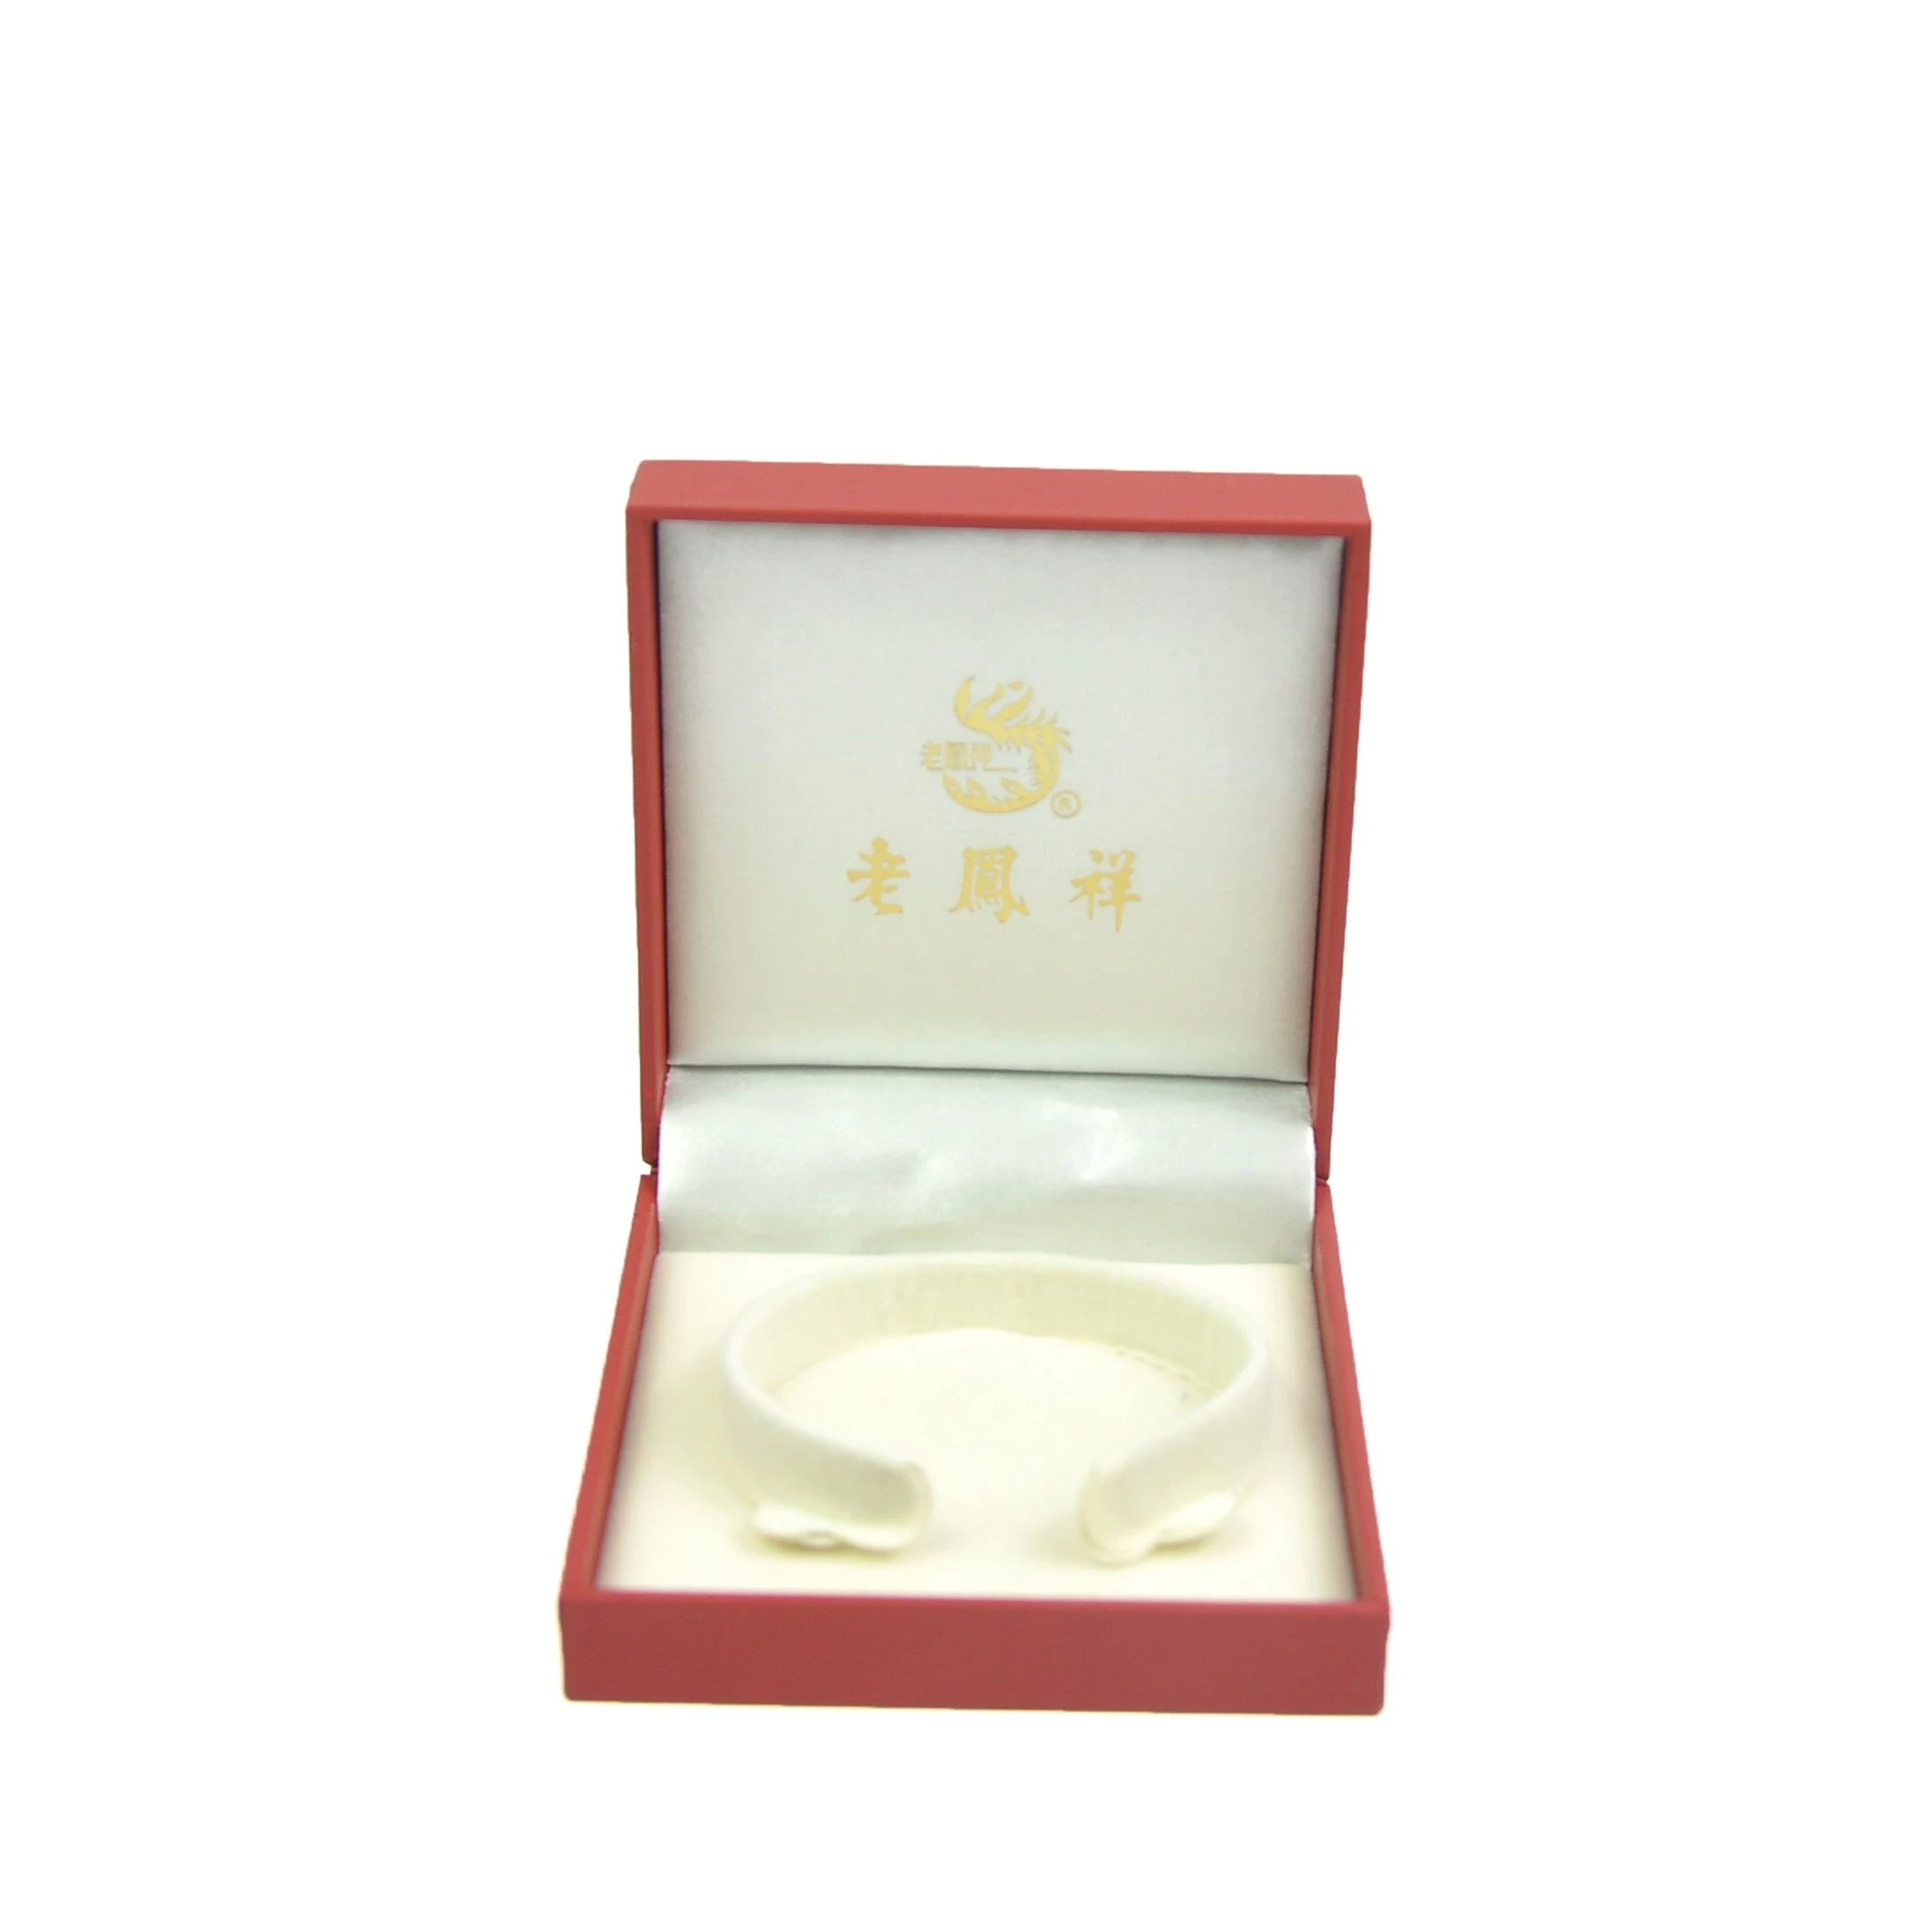 Yadao Stock Red Box for Jewelry Store Accessories Exhibition Jewelry Plastic Box